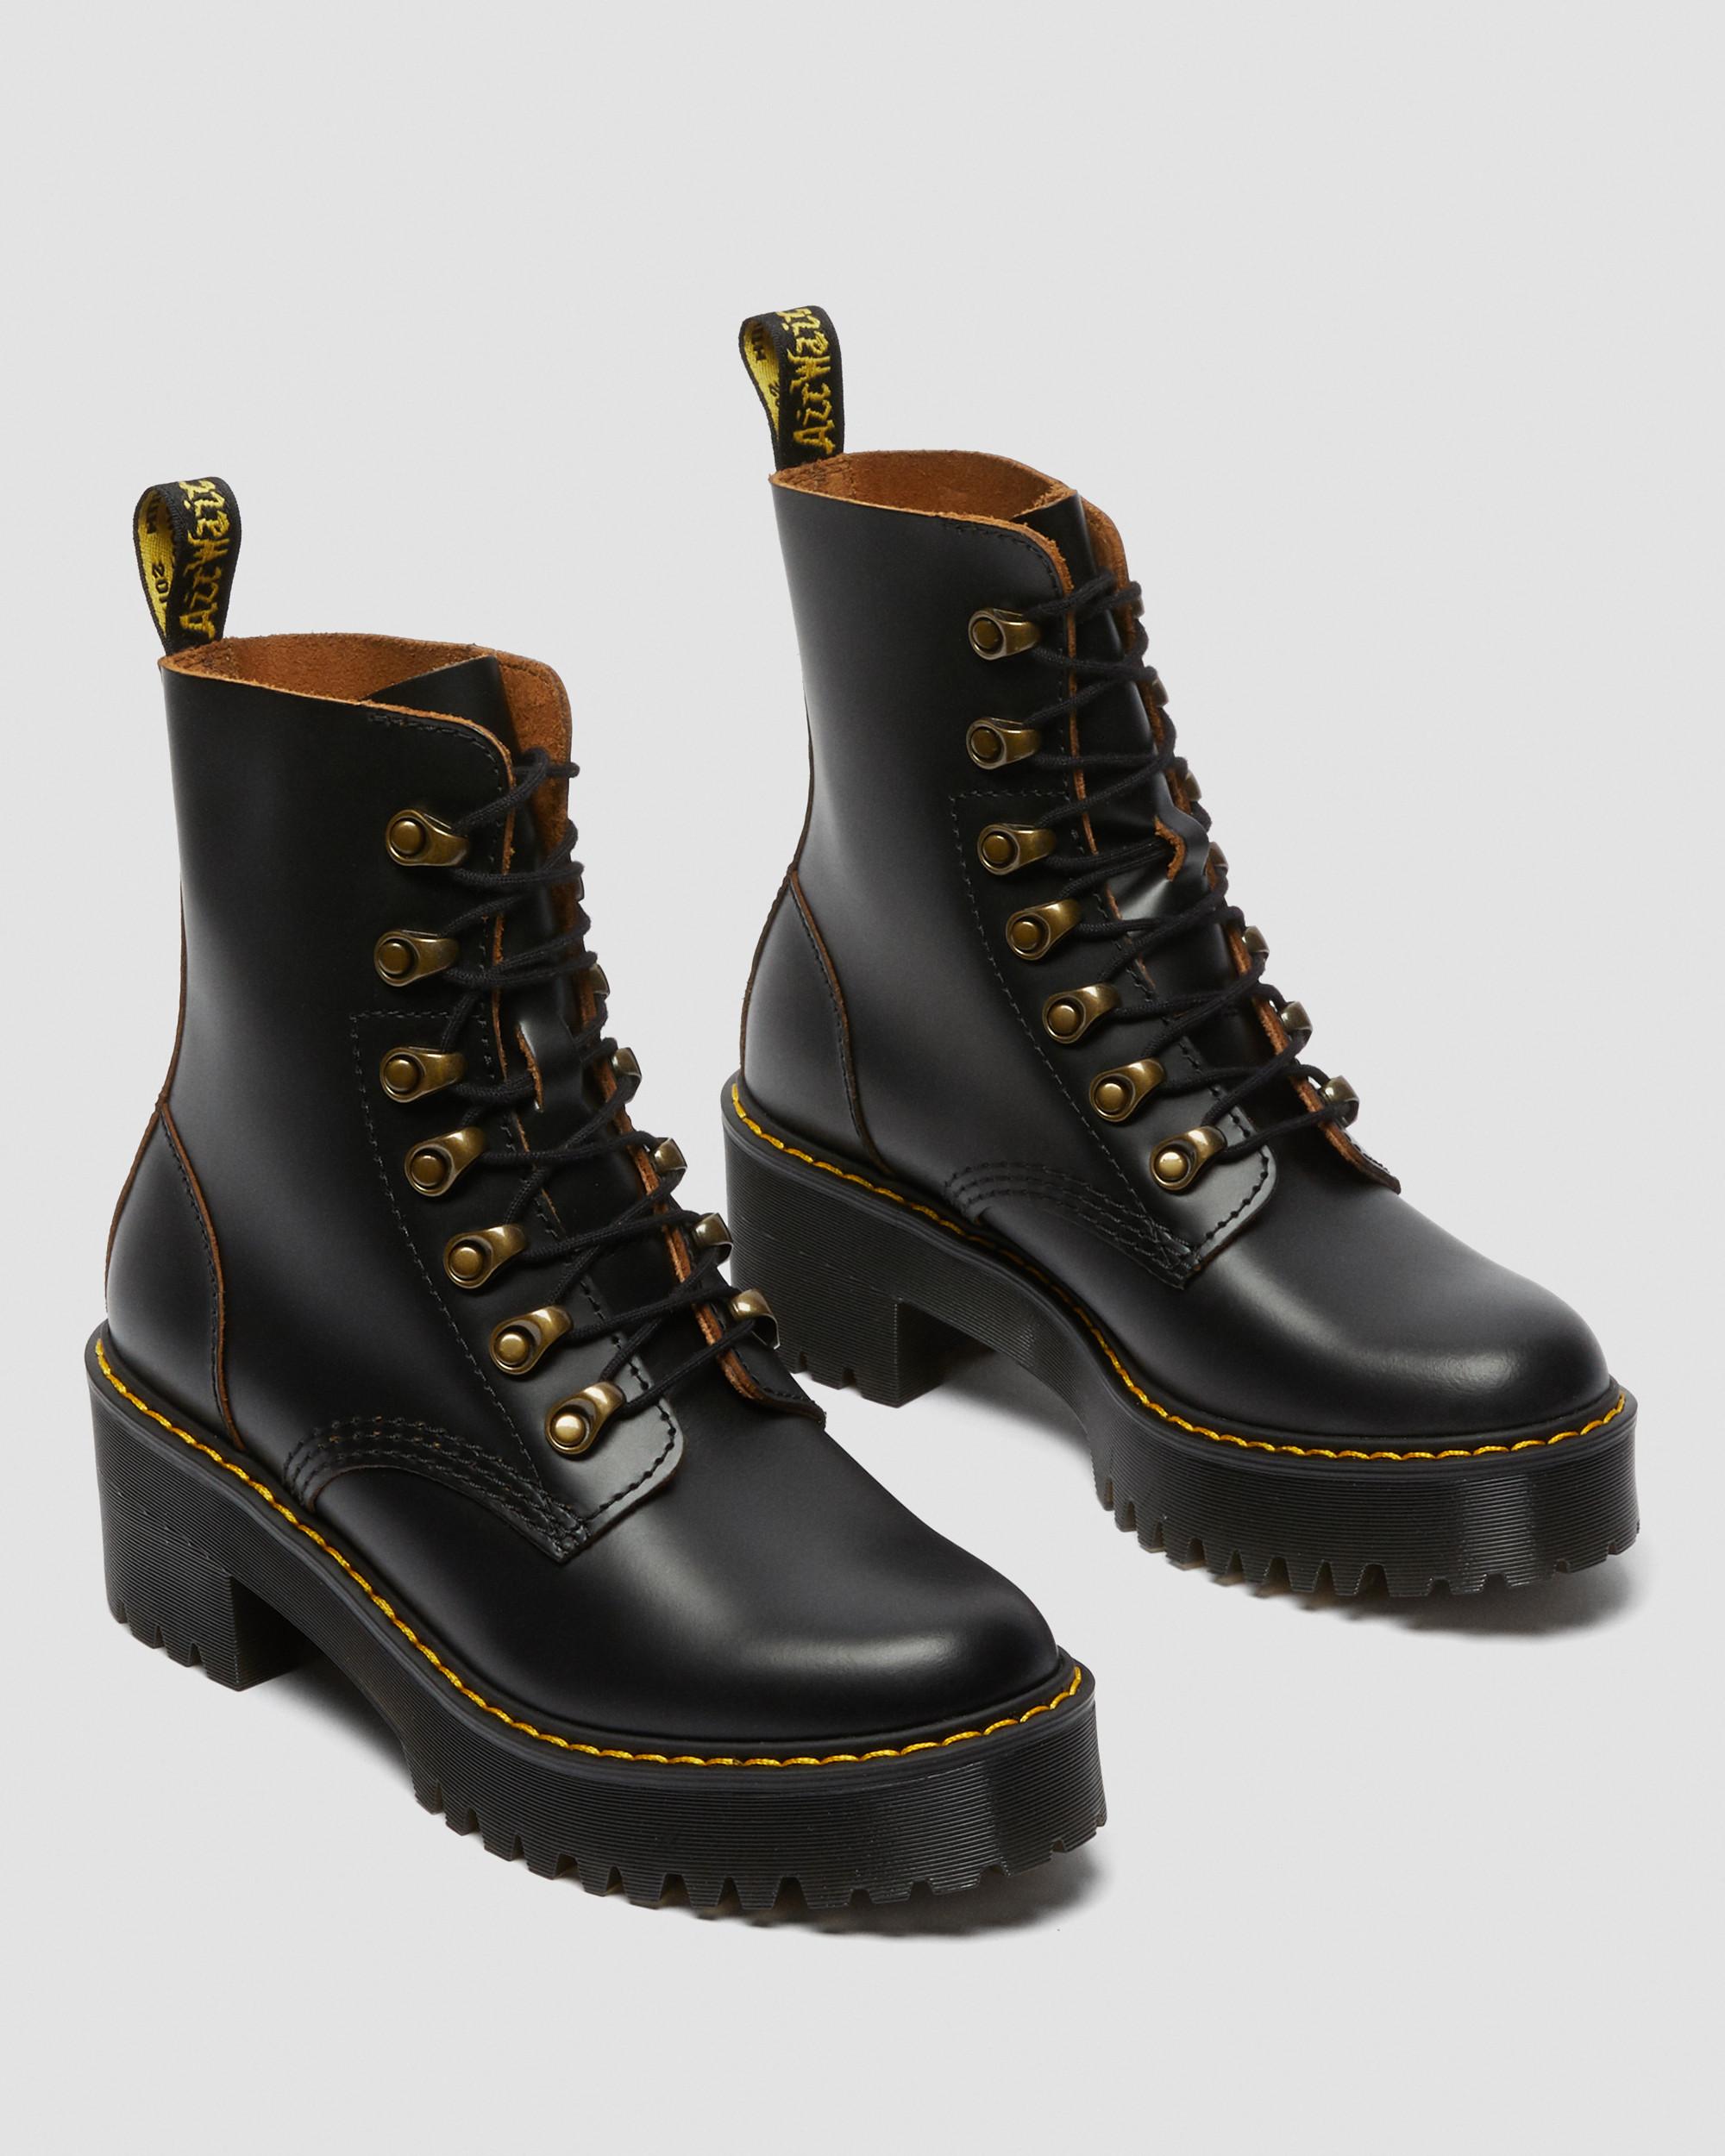 I bought these doc martens but the straps are a little loose. Should I go a  size down? I ordered a size 7. : r/DocMartens